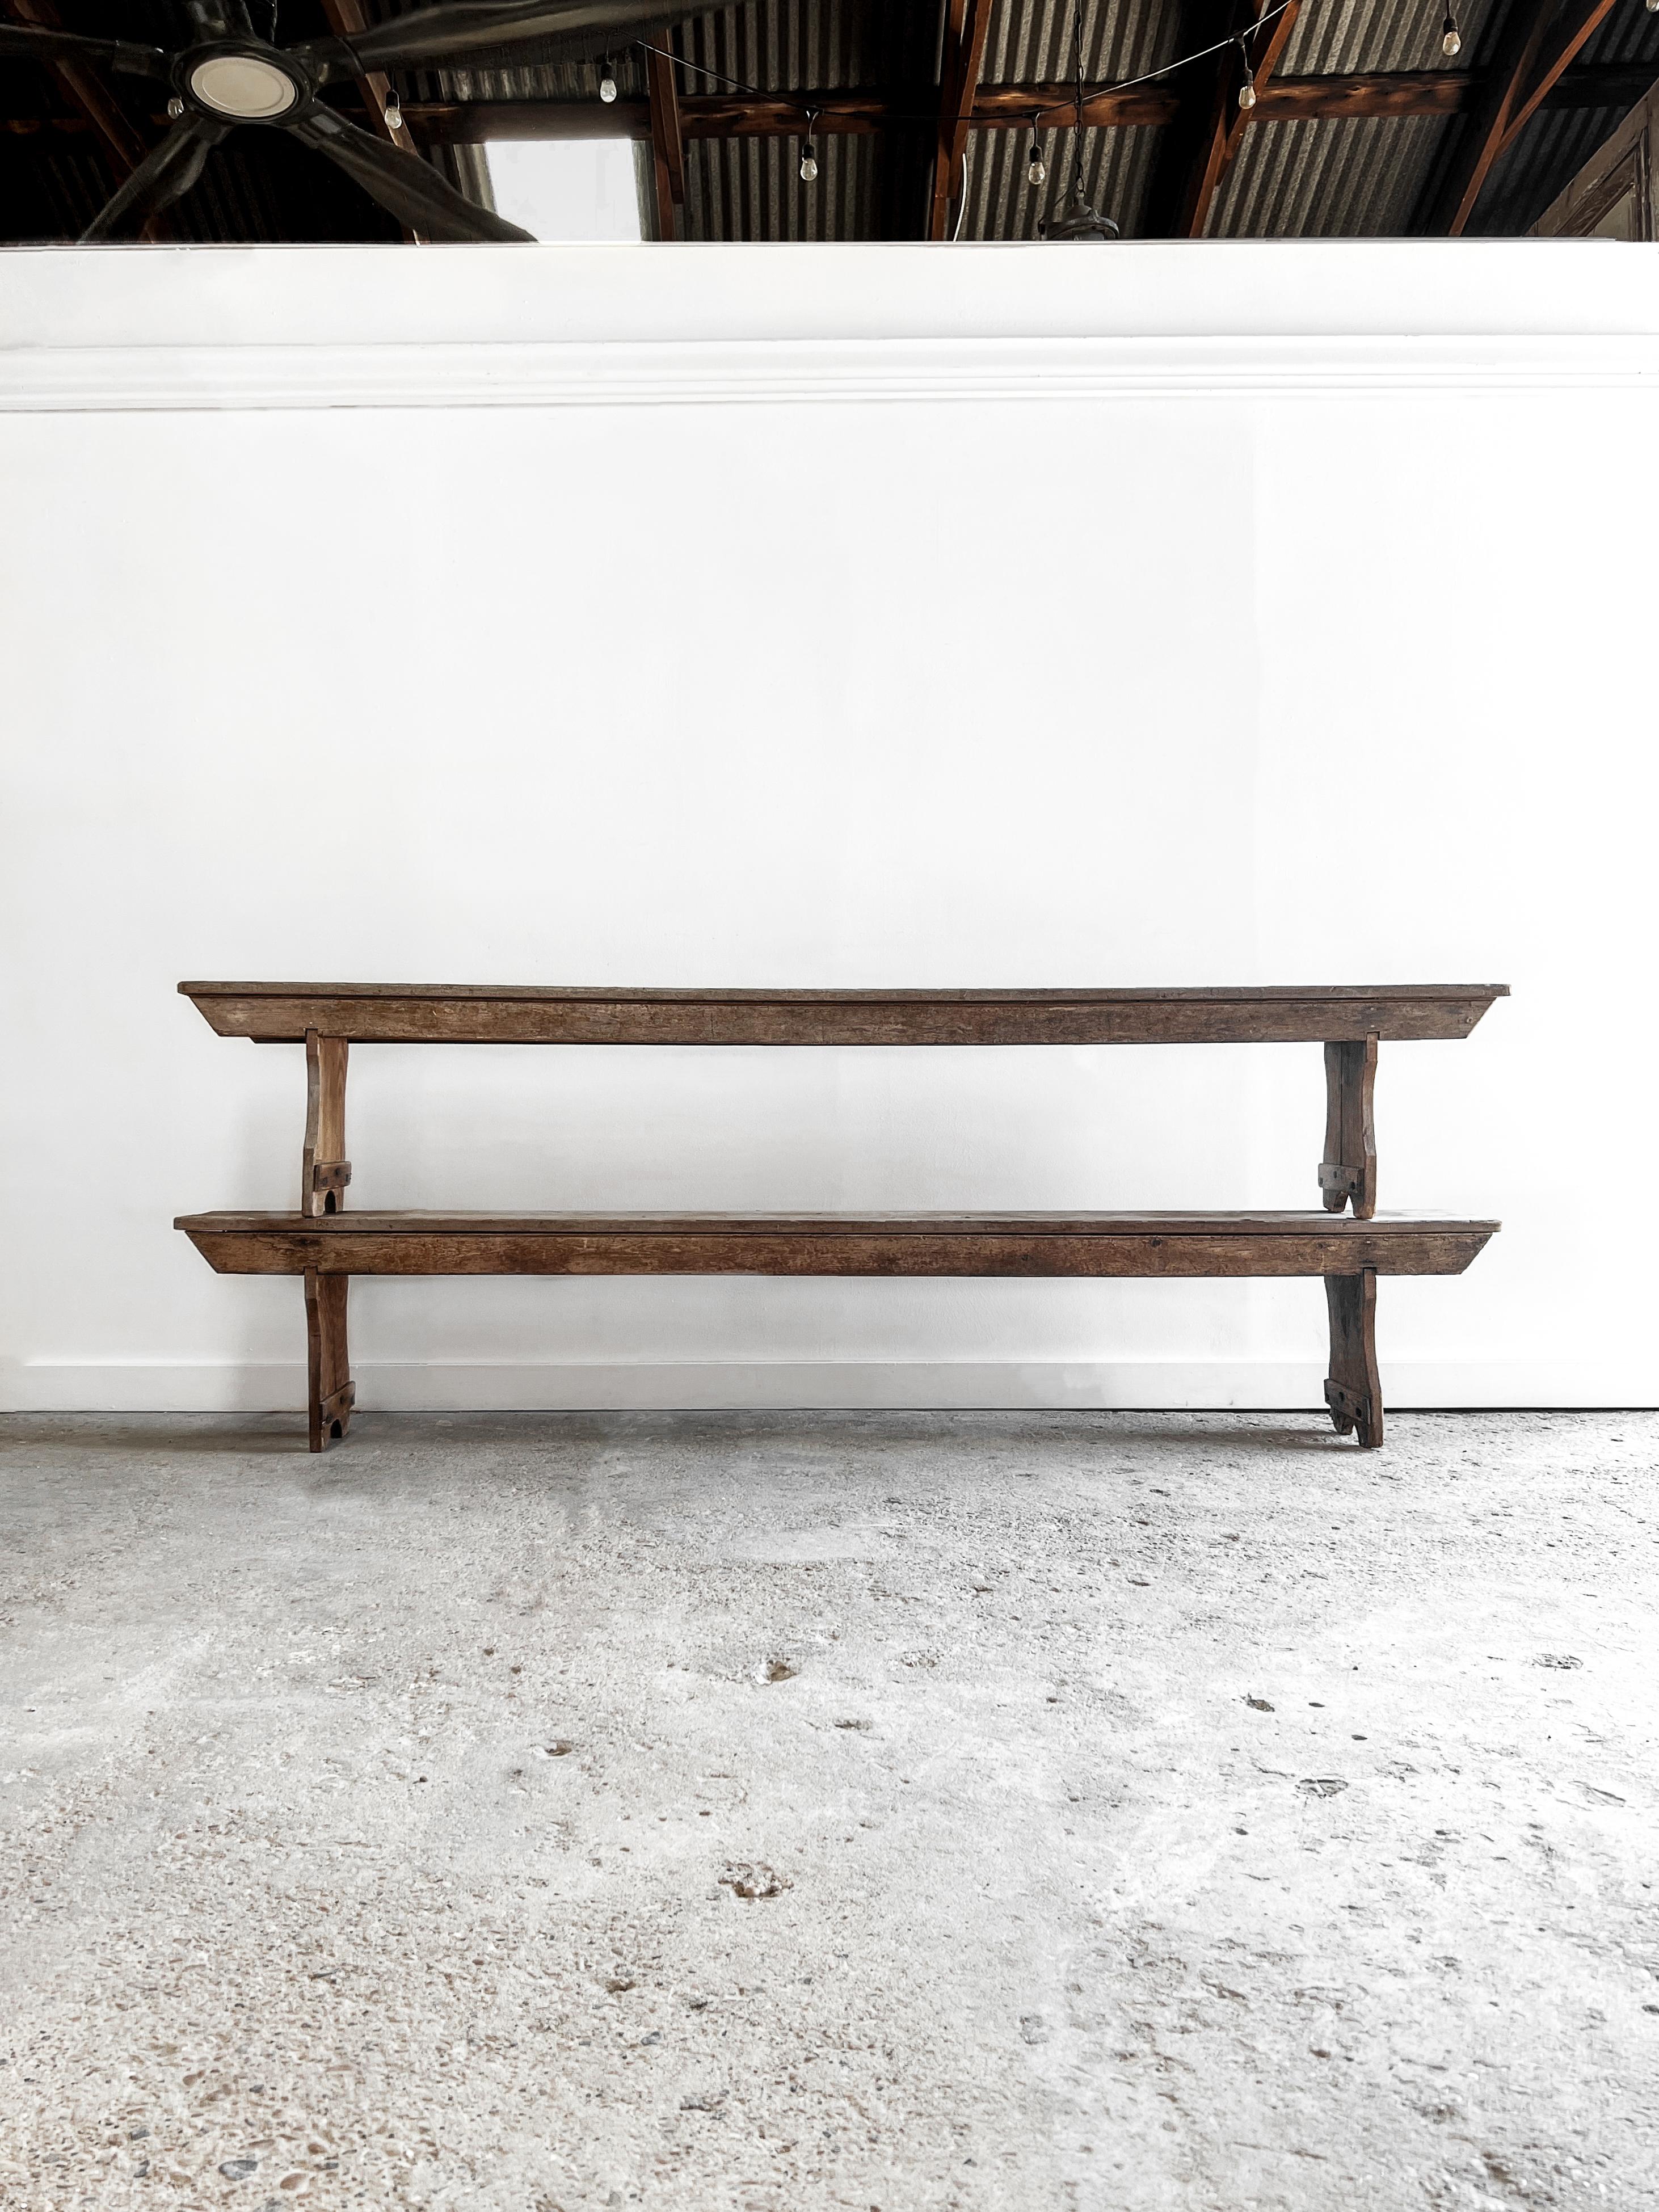 A pair of late 19th-century classic farmhouse benches with a primitive design. Found in France, the benches are crafted from solid pine with a beautiful weathered patina. Sturdy and stylish, the benches will add warmth and vintage charm to your